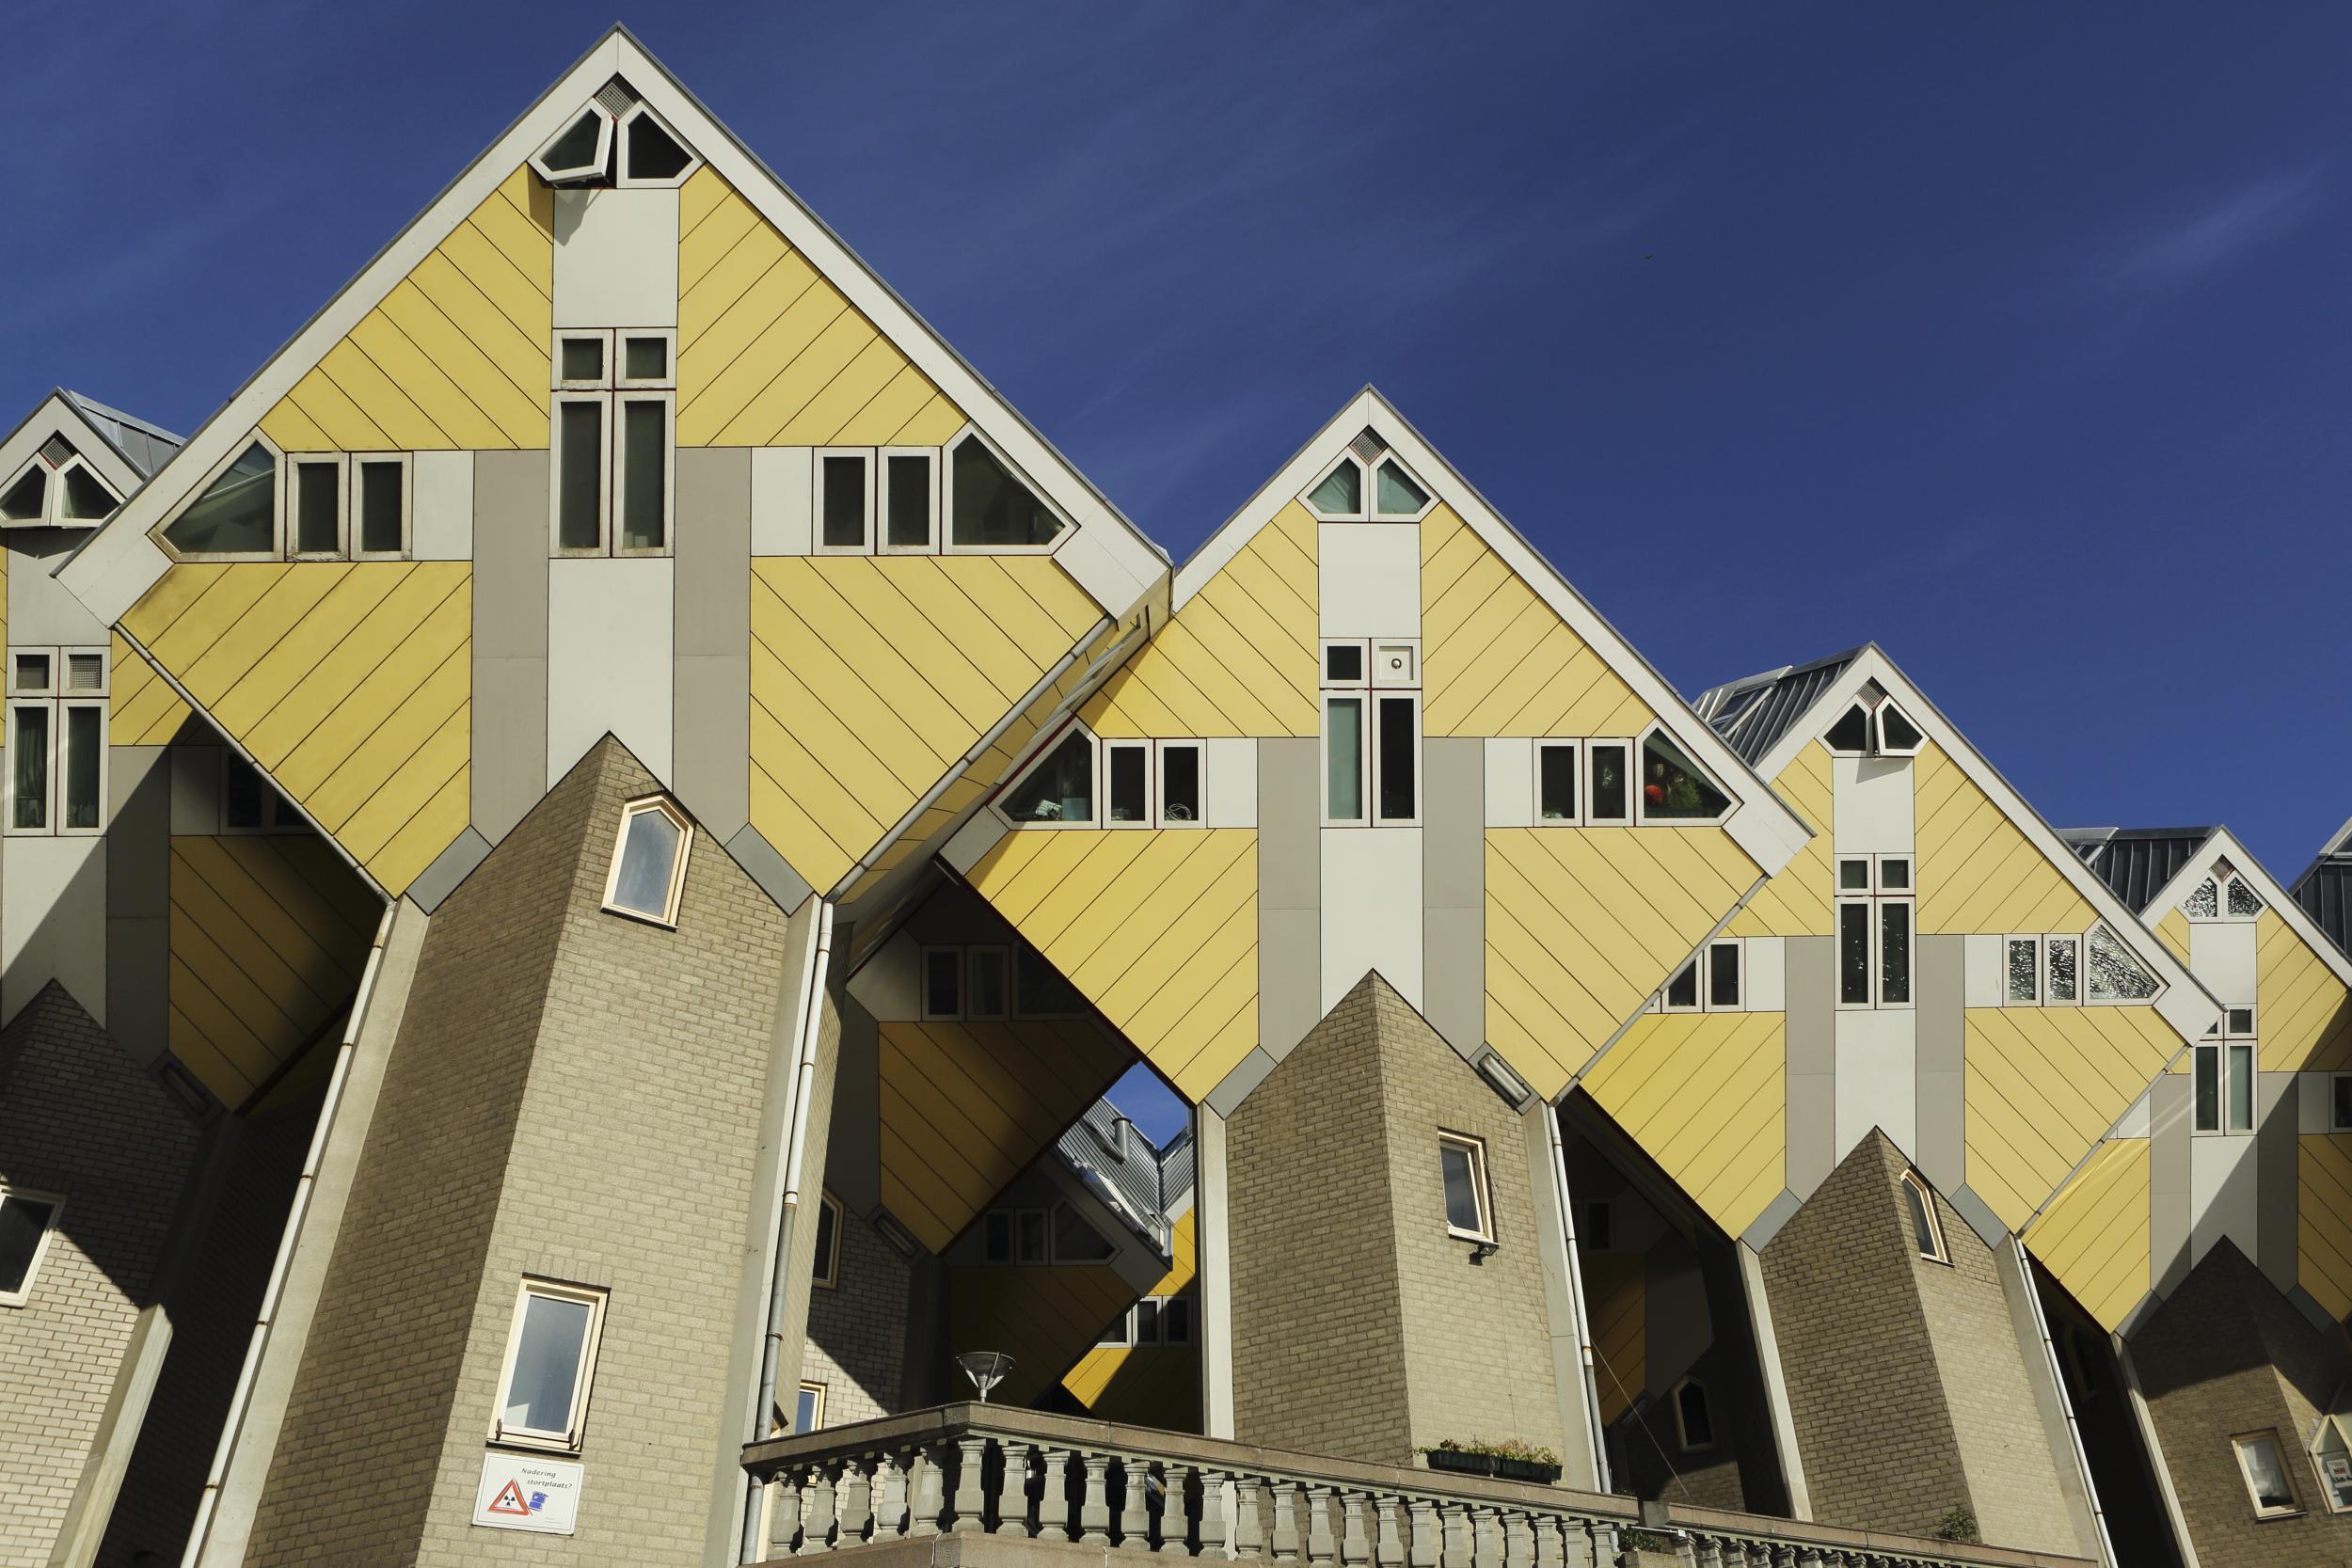 Rotterdam's surreal canary-yellow Cube Houses